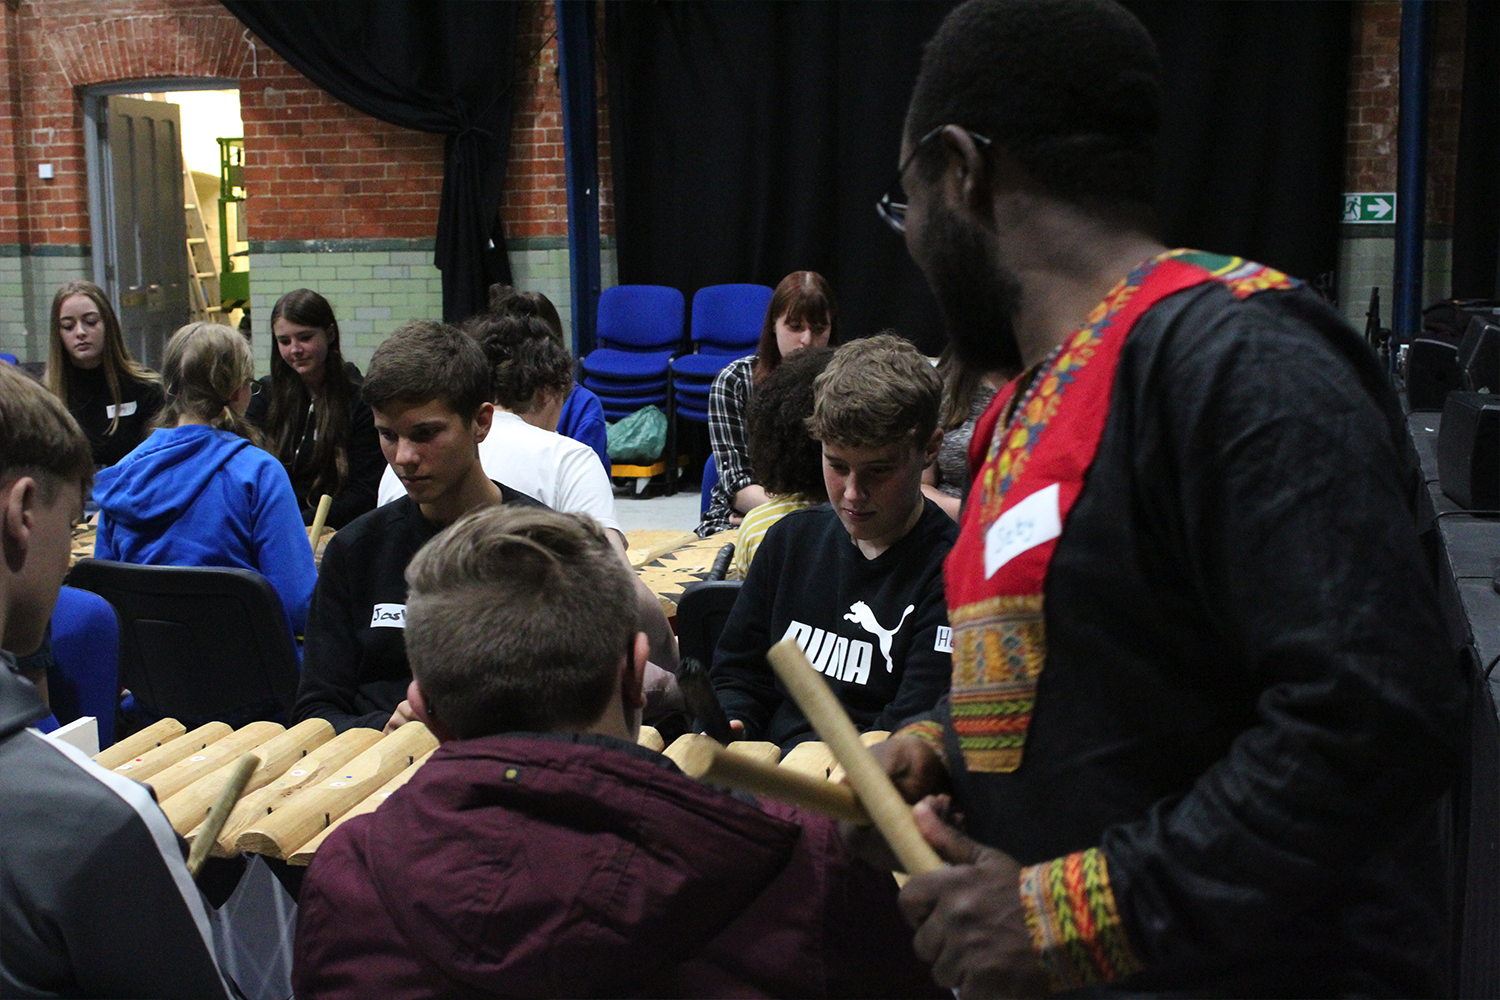 A music leader helps young Lincolnshire people play a marimba